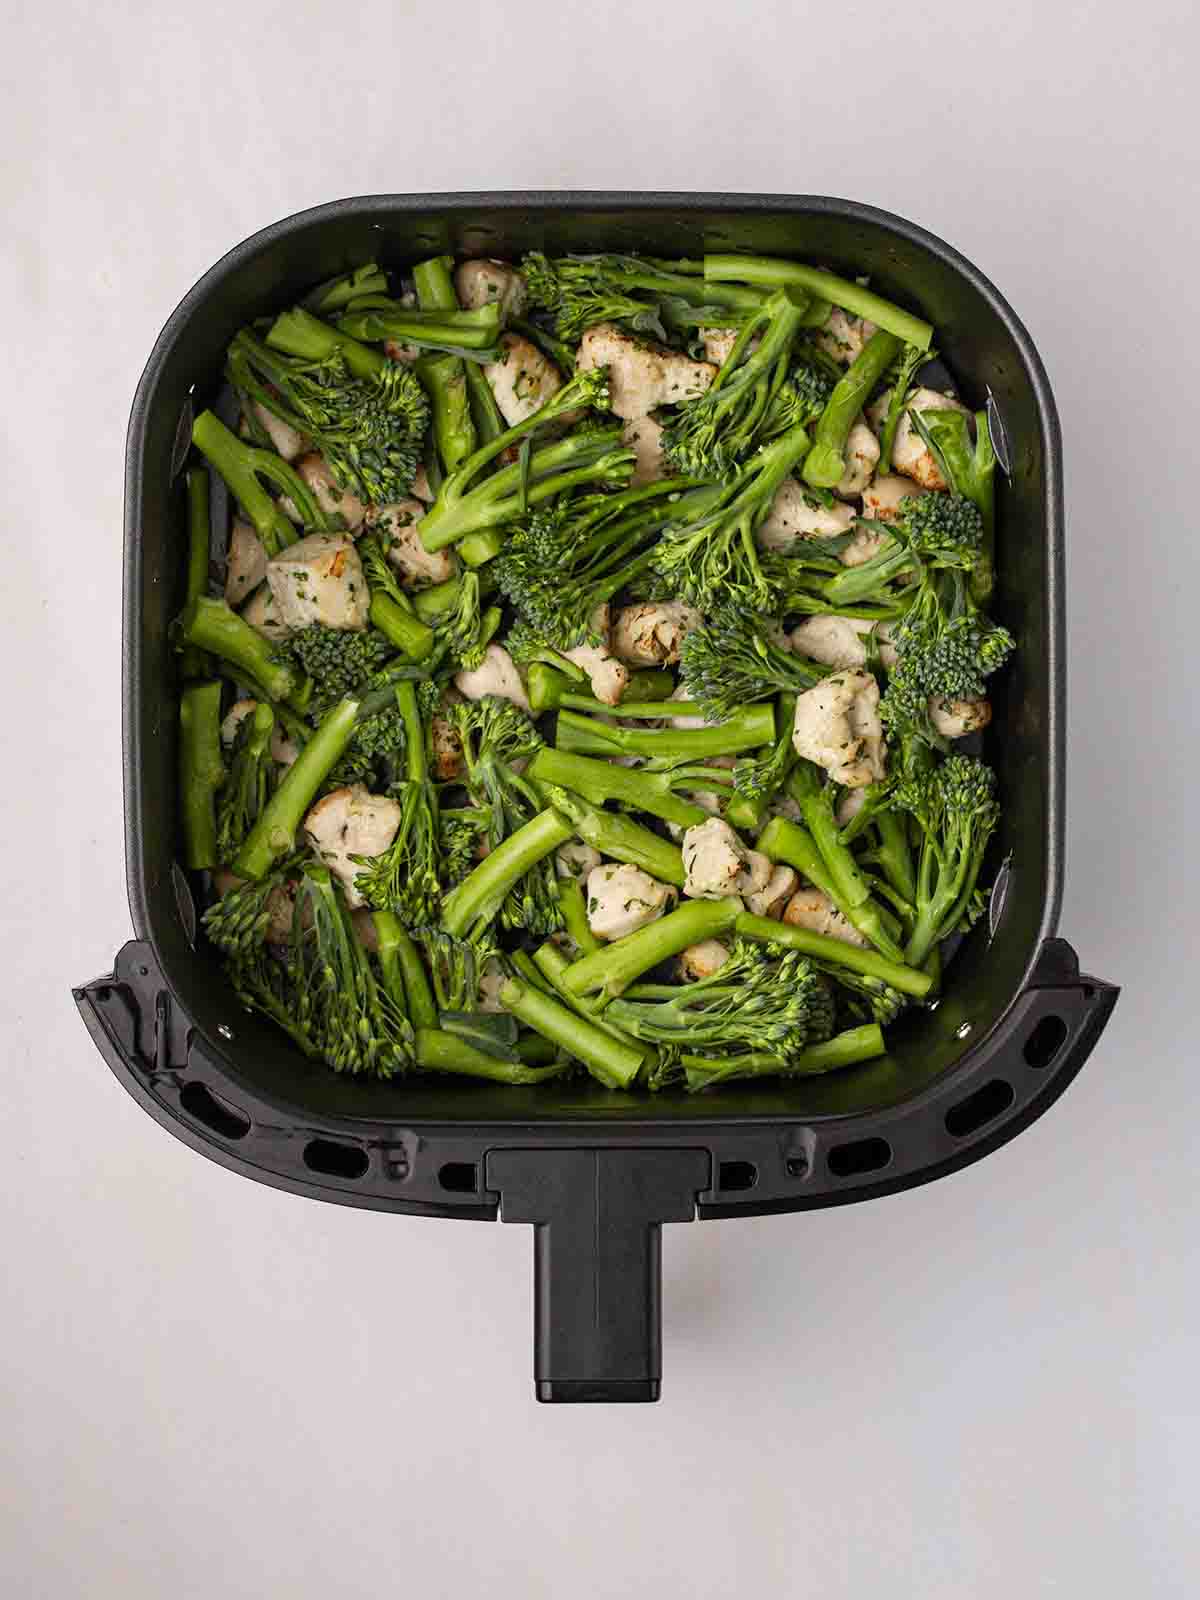 An air fryer filled with cooked chicken and raw broccoli to show step 2 in the recipe for Air Fryer Garlic Butter Chicken.